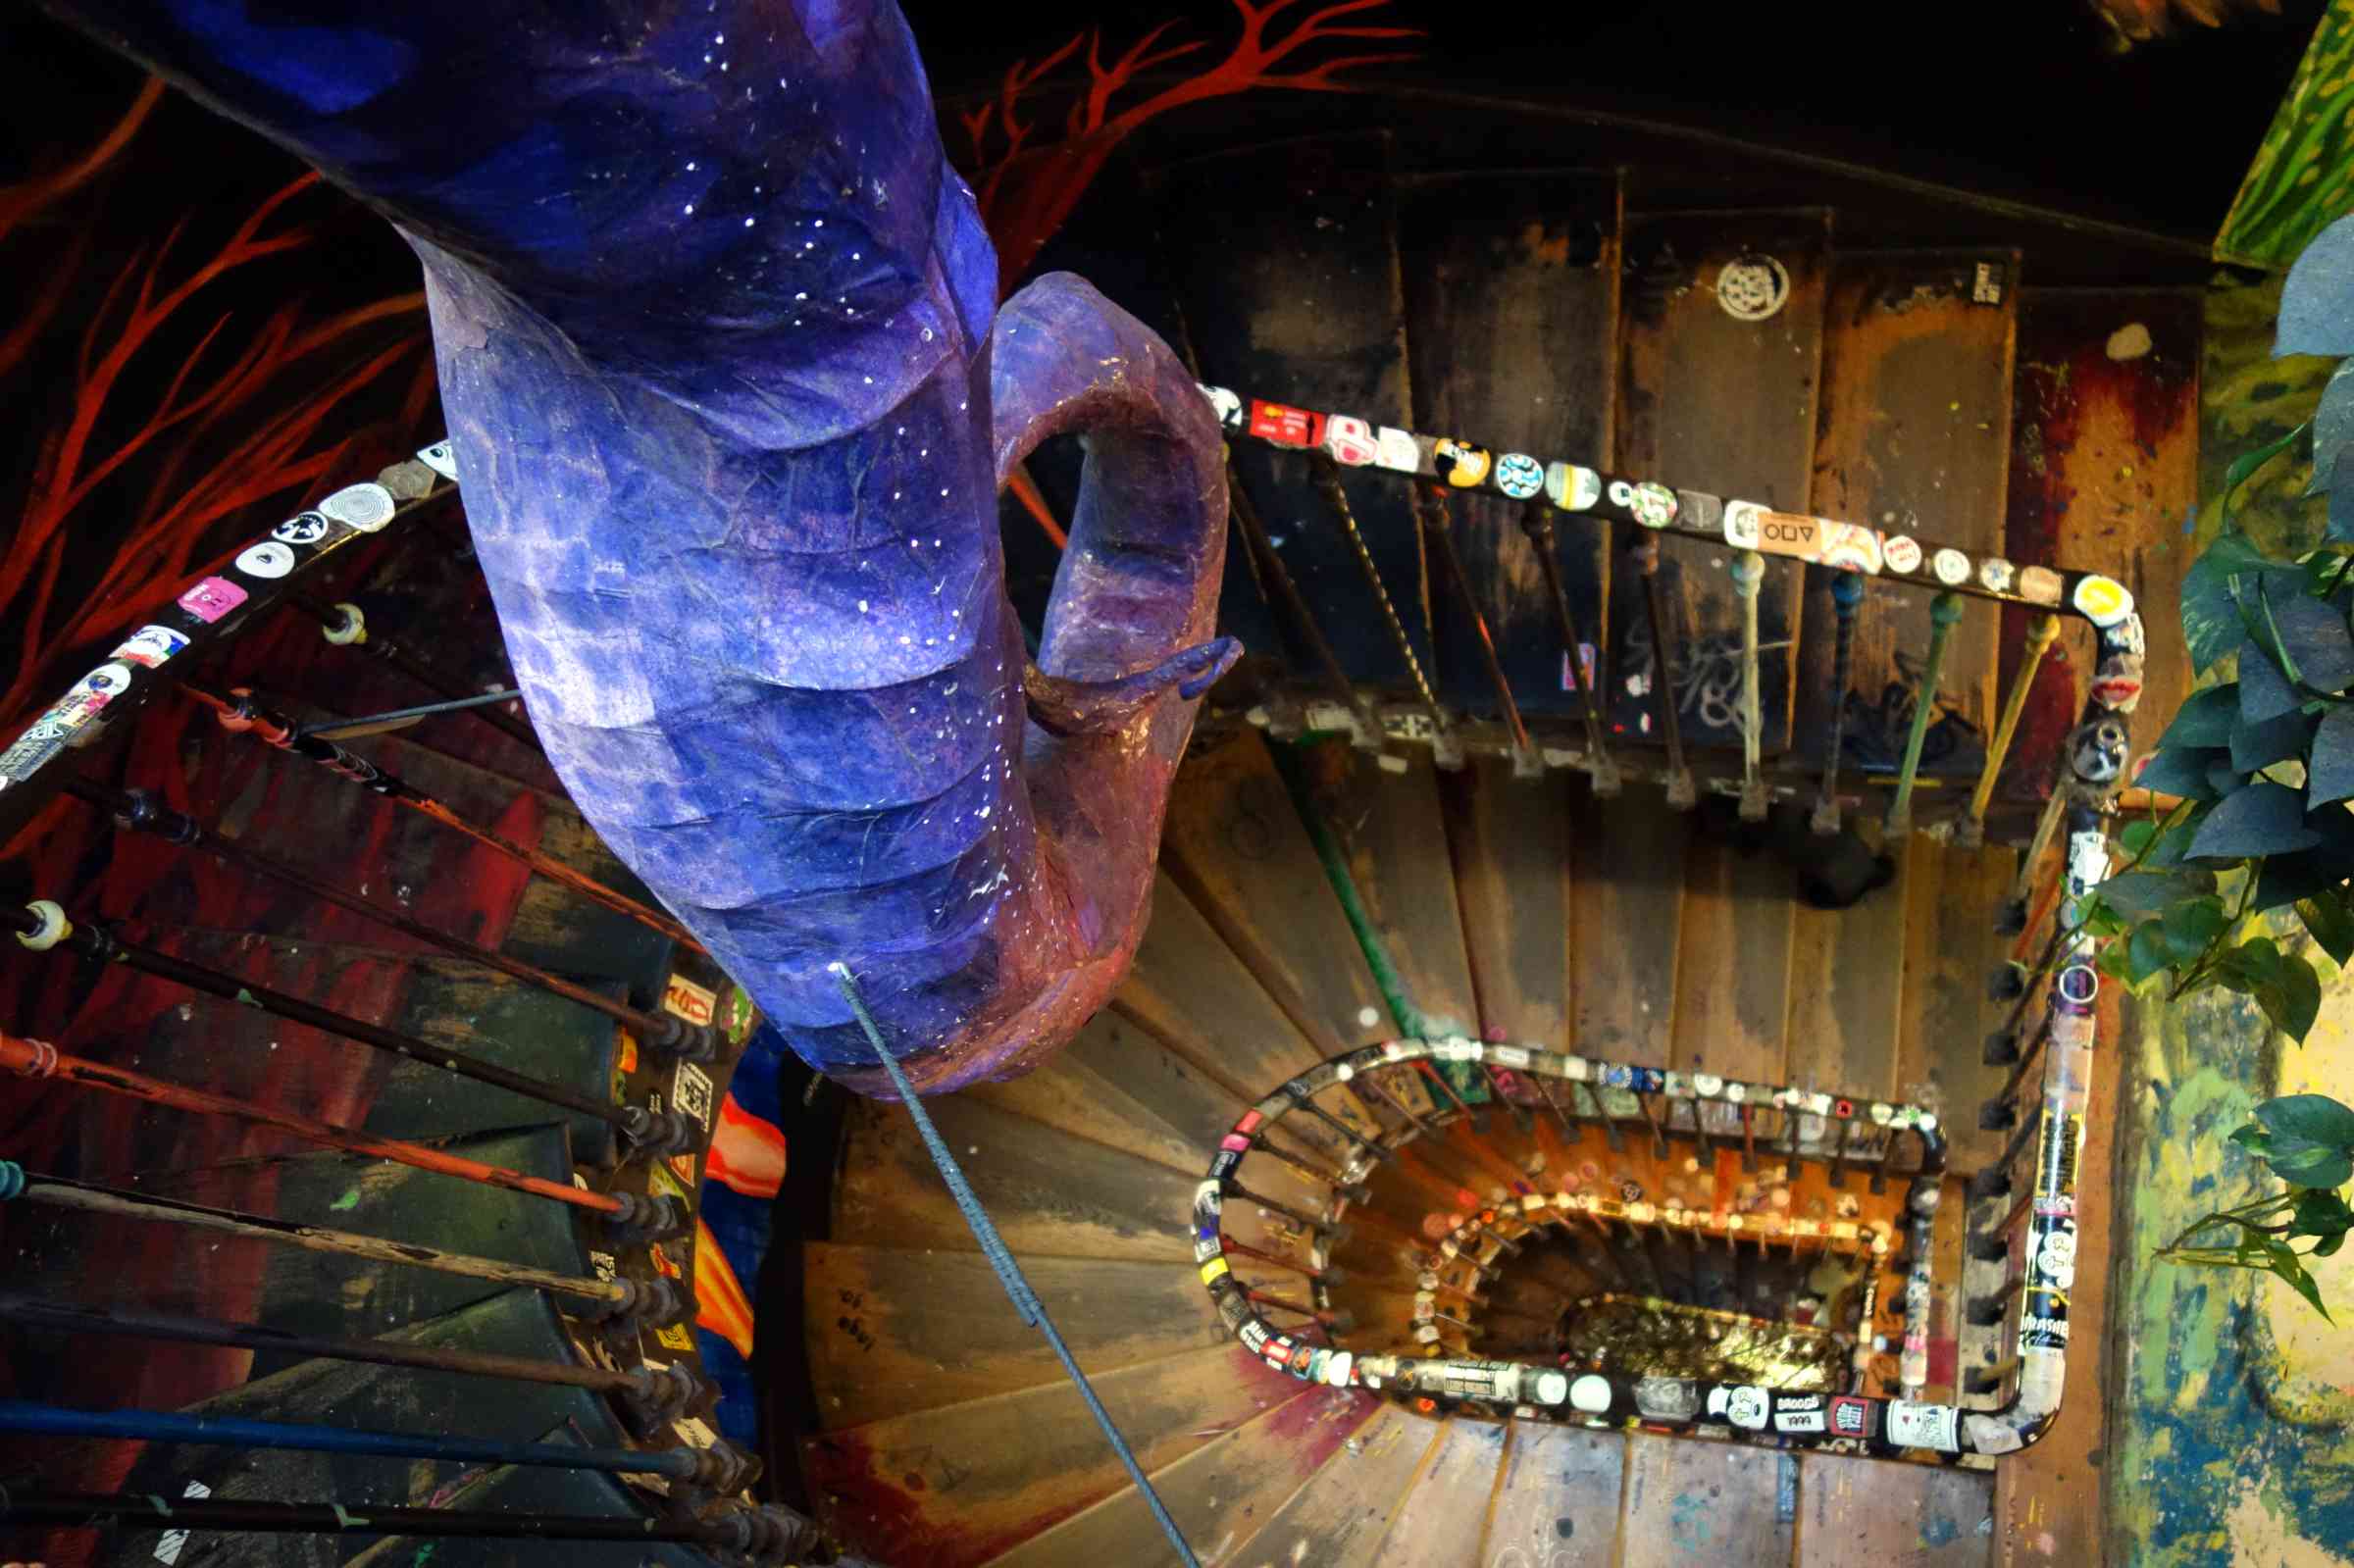 A giant purple tentacle hangs in the centre of a stairwell. The stairs curve round and round below. The stairs and walls are covered in painted designs and stickers.